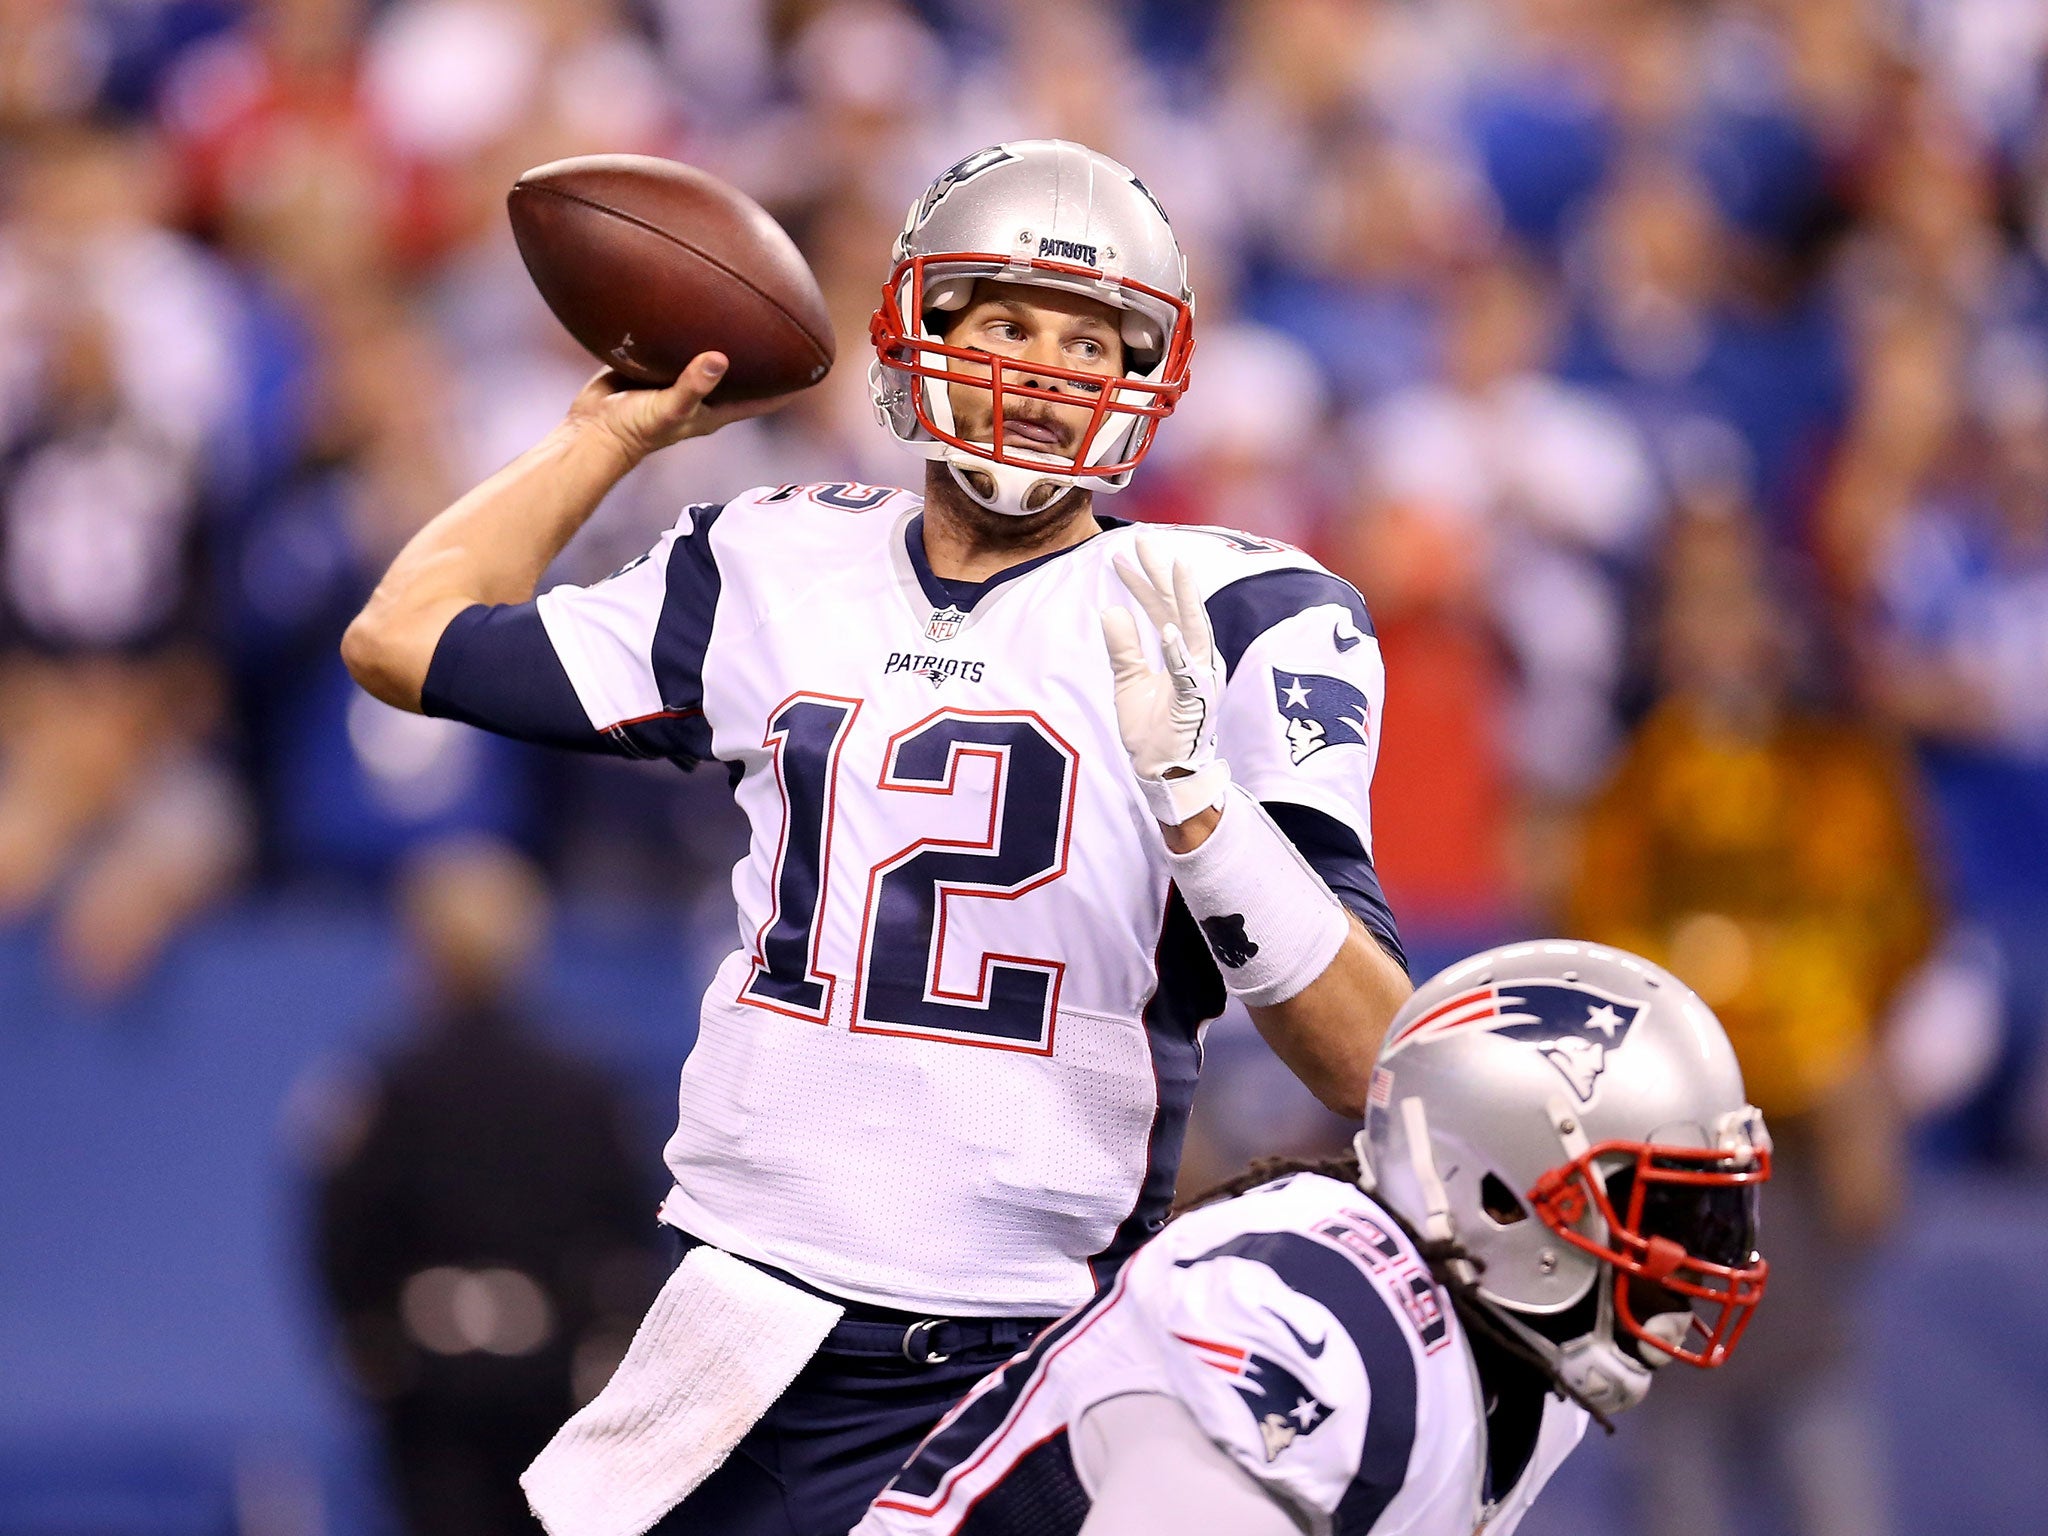 Tom Brady inspired the New England Patriots to a 34-27 win over the Indianapolis Colts